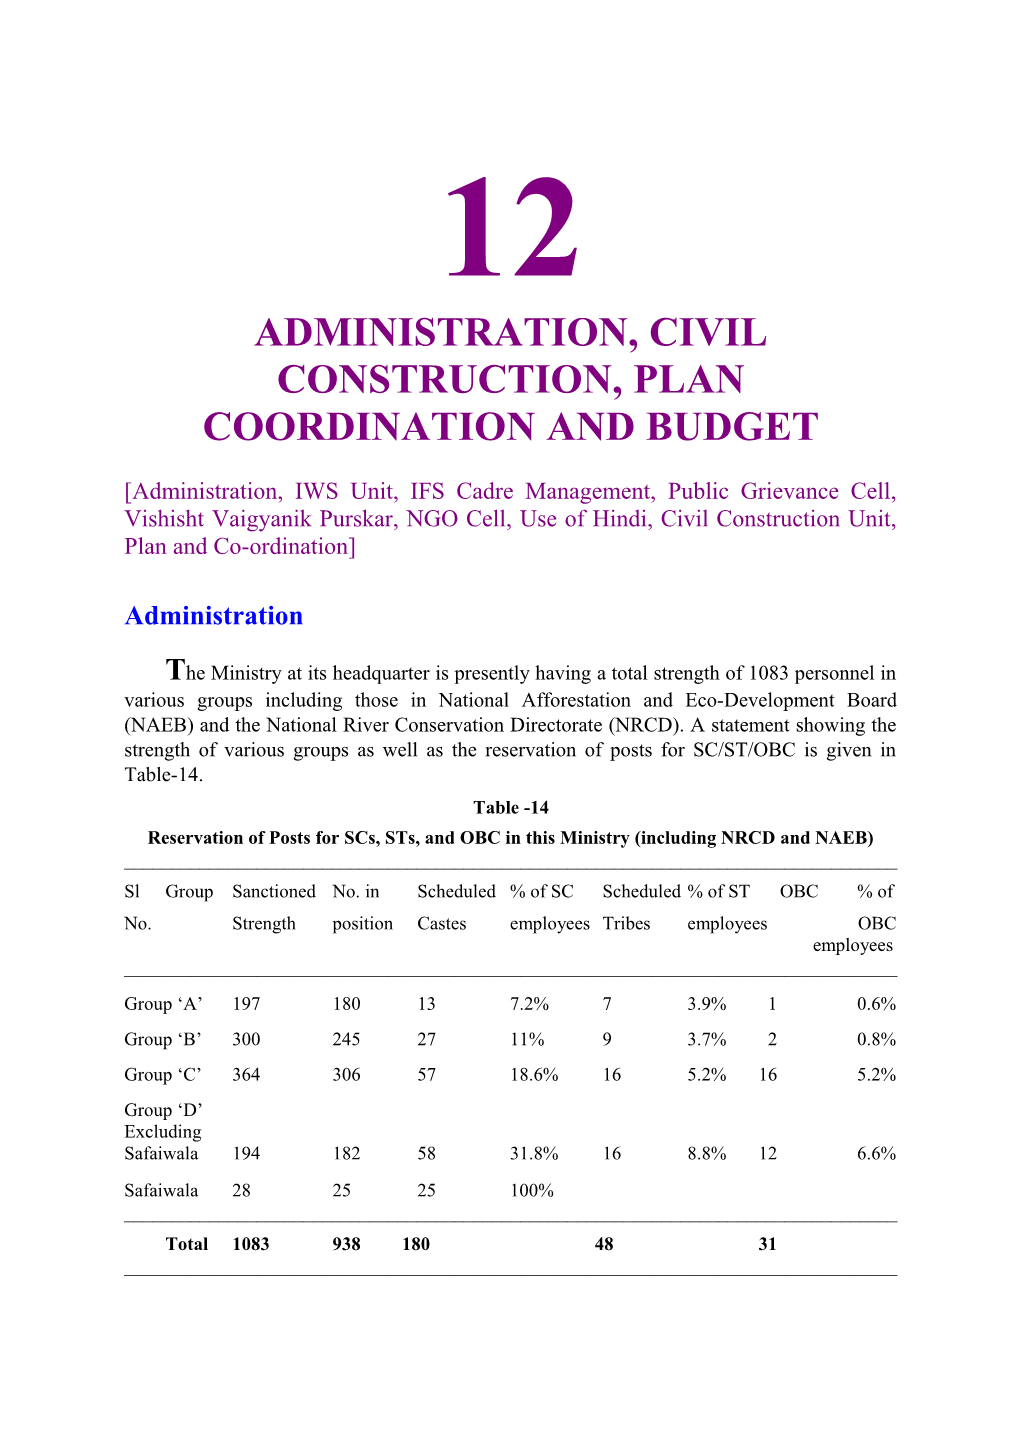 Administration, Civil Construction, Plan Coordination and Budget